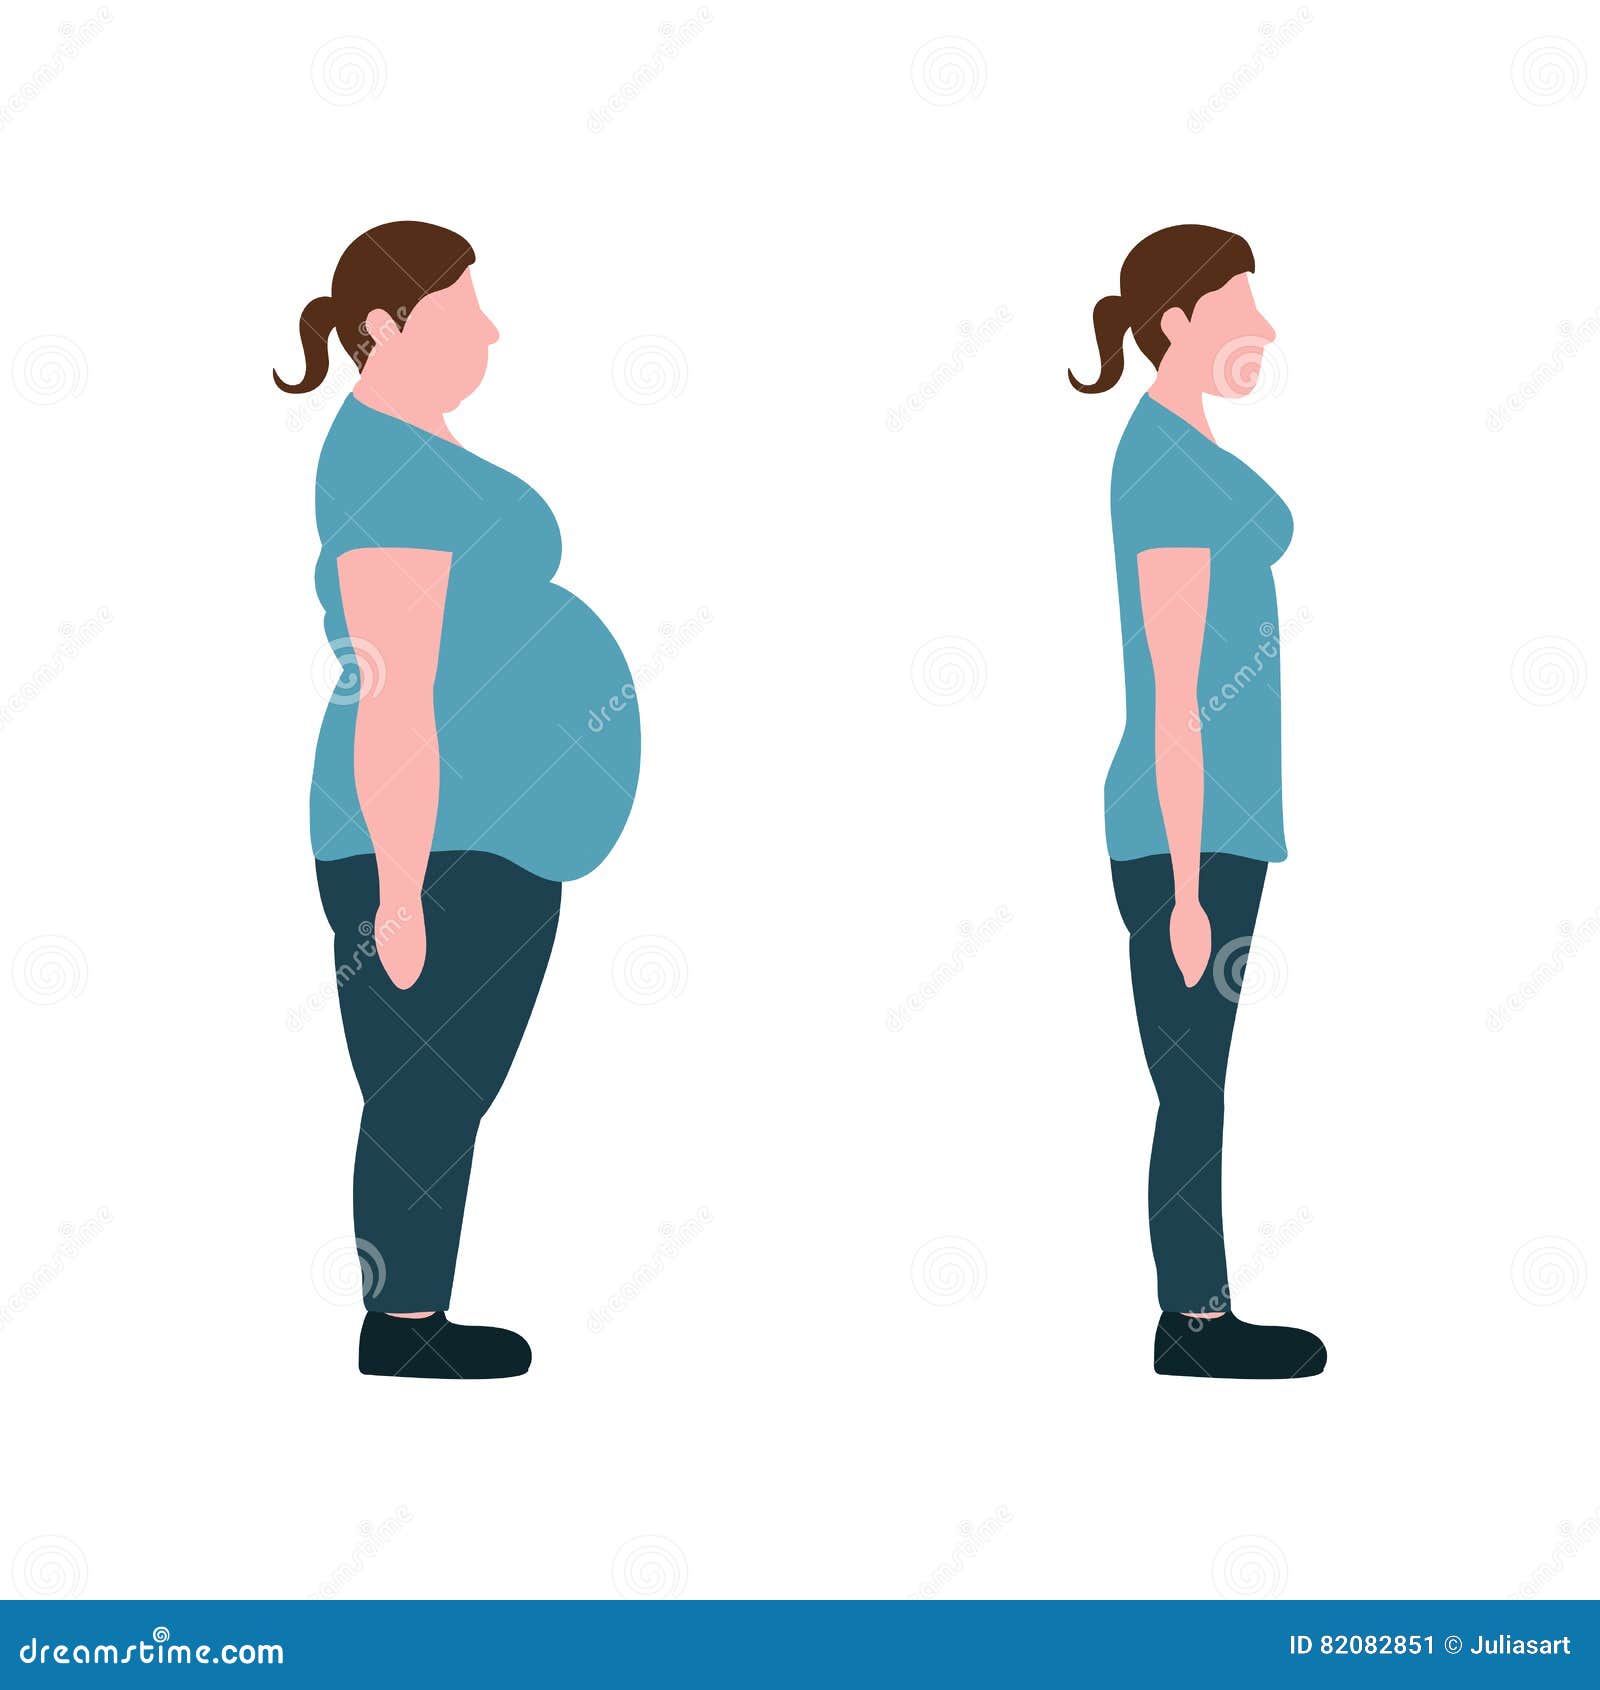 Vector Illustration. Figures of Women Thick and Thin. Stock Vector ...